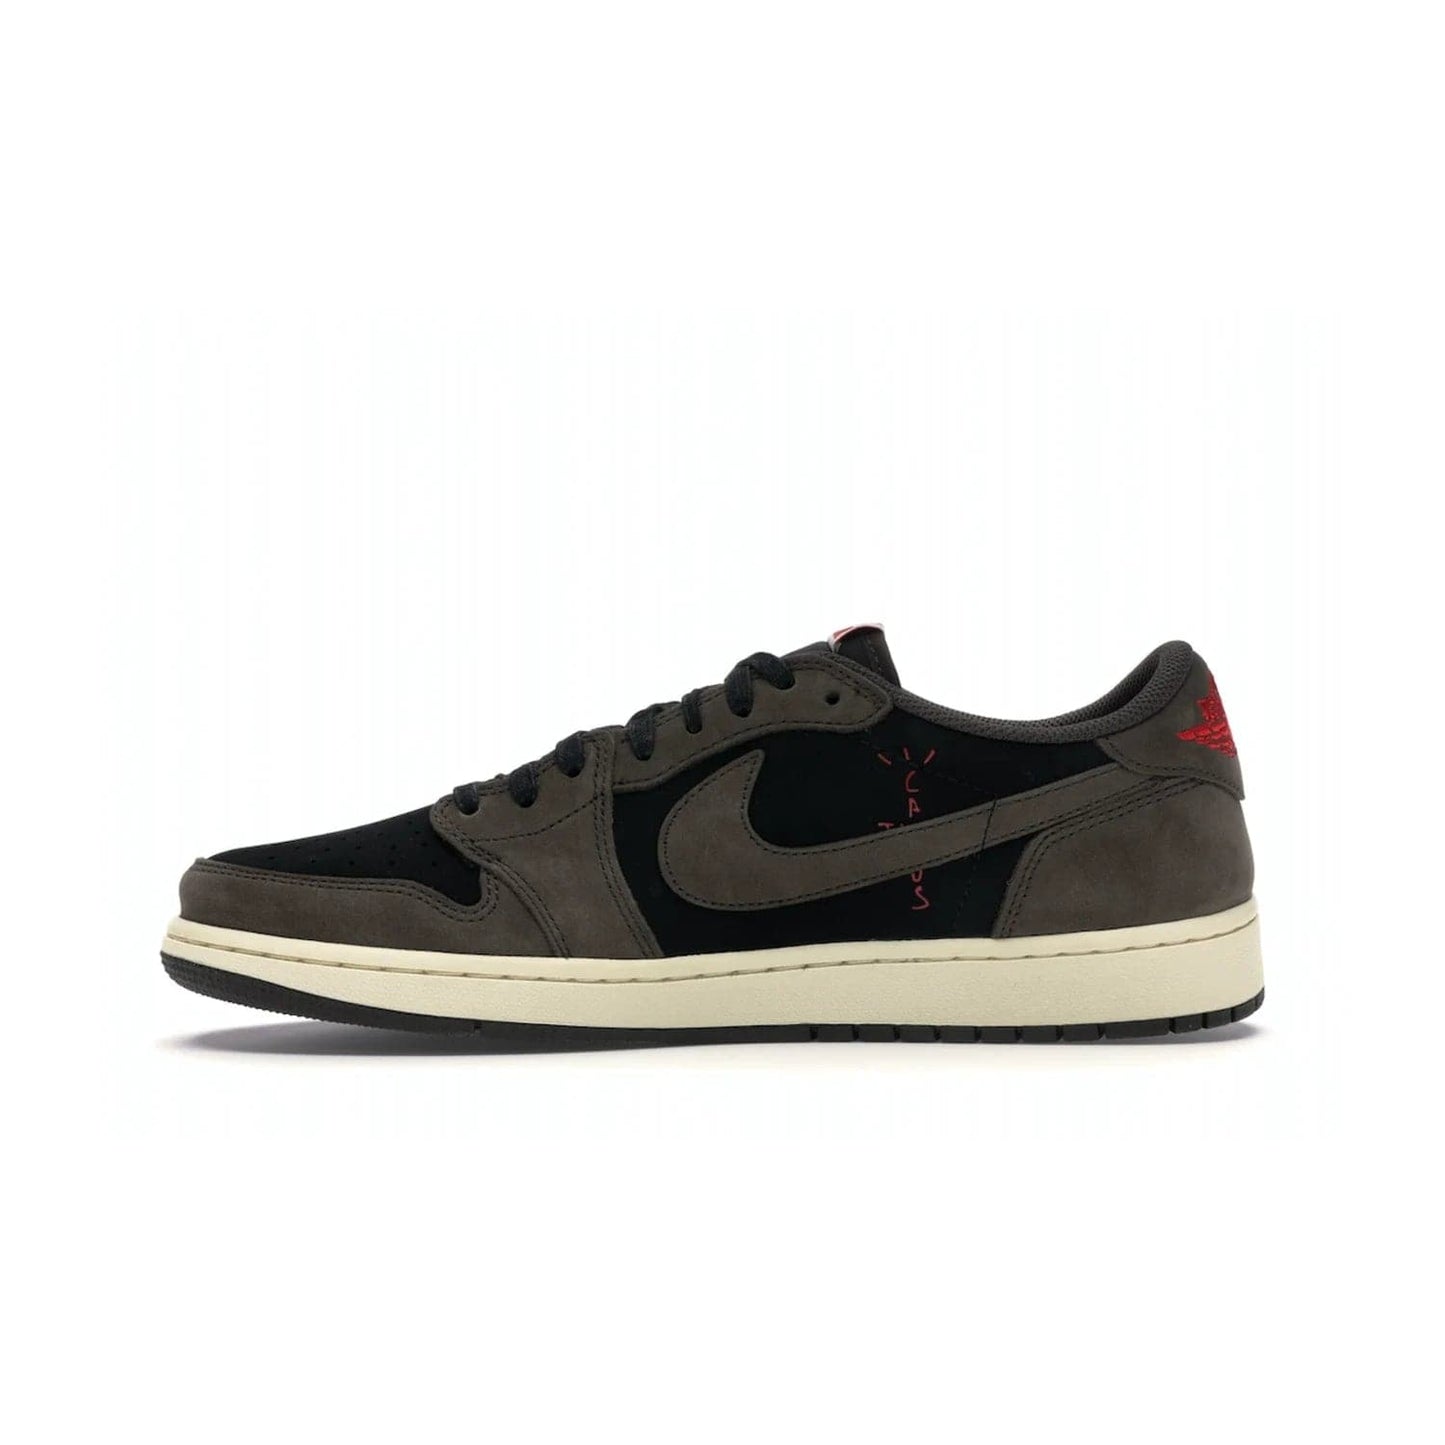 Jordan 1 Retro Low OG SP Travis Scott - Image 19 - Only at www.BallersClubKickz.com - The Air Jordan 1 Low Travis Scott combines modern and classic design elements for a stylish look. It features a black upper with dark brown overlays, red accents, sail midsole, and dark brown outsole. Signature touches include a backwards Swoosh logo and “Cactus Jack” inscriptions. Released in July 2019.